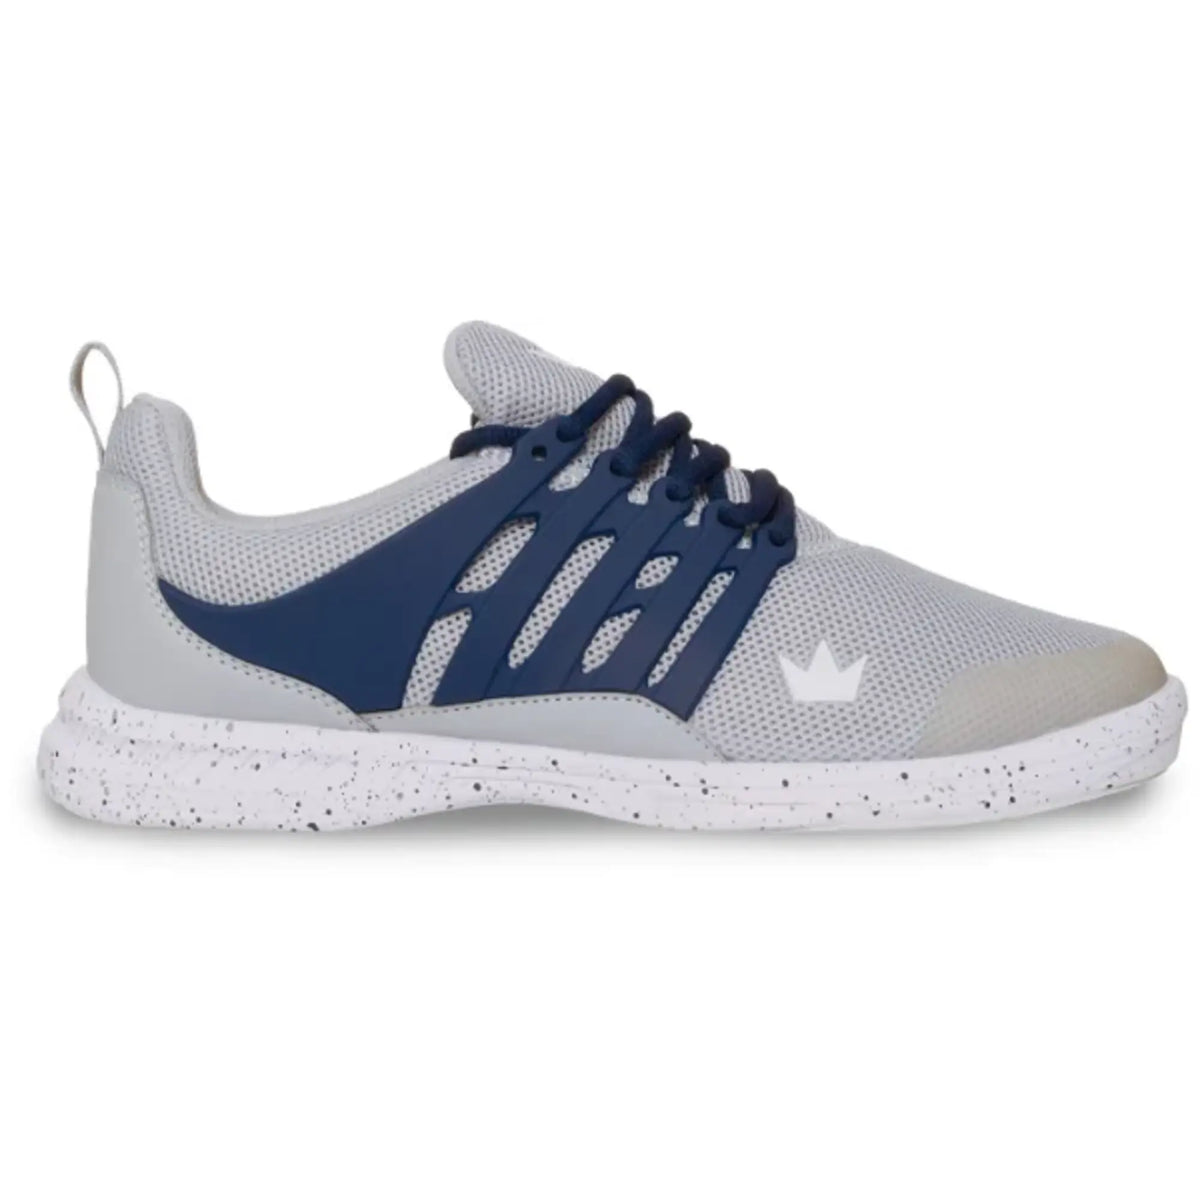 Avalanche Grey/Navy ‍Shoes